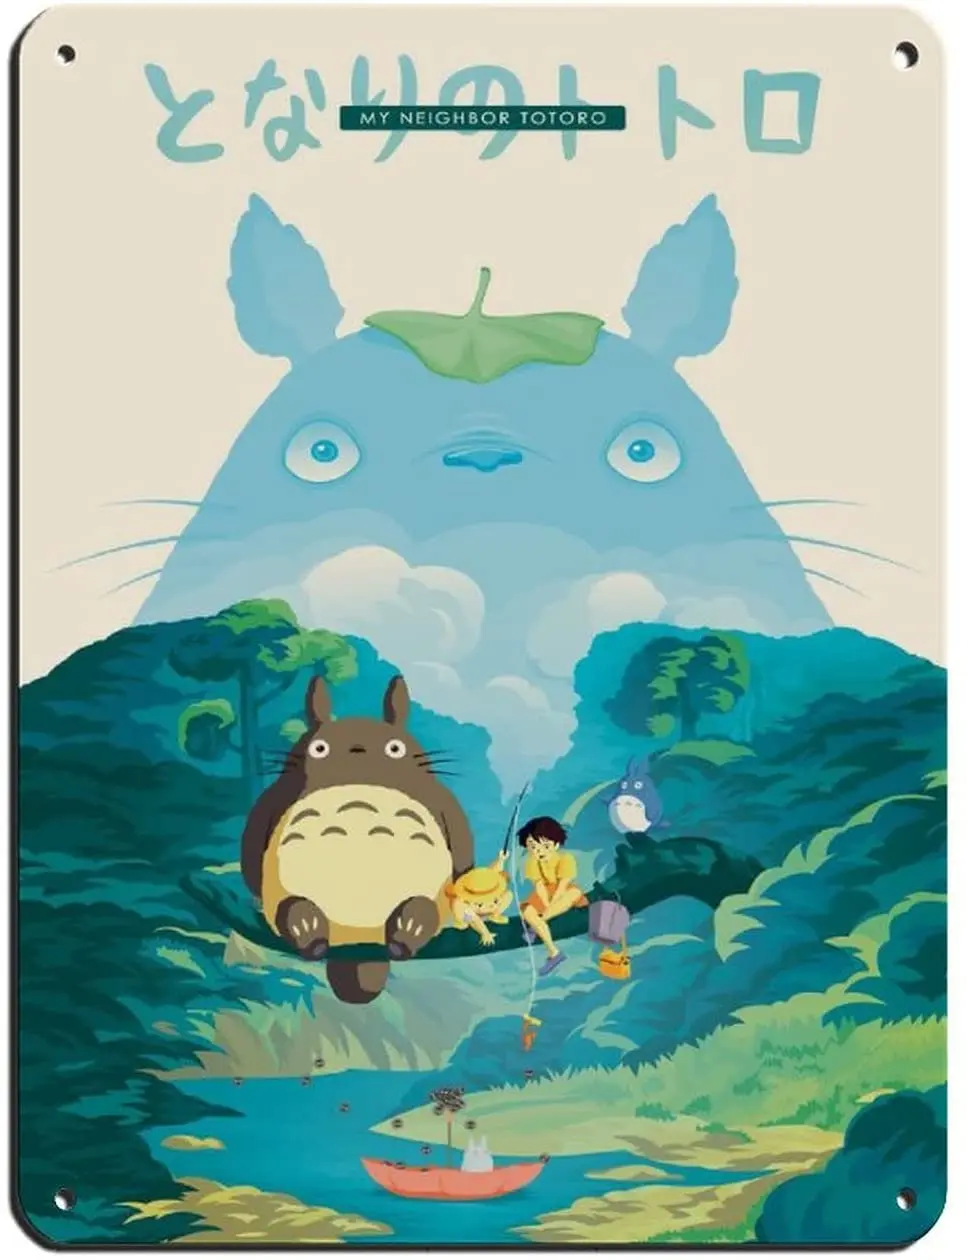 

Movie Poster Classic Movie My Neighbor Totoro Movie Poster 4 Tin Sign Vintage Metal Pub Club Cafe bar Home Wall Art Decoration